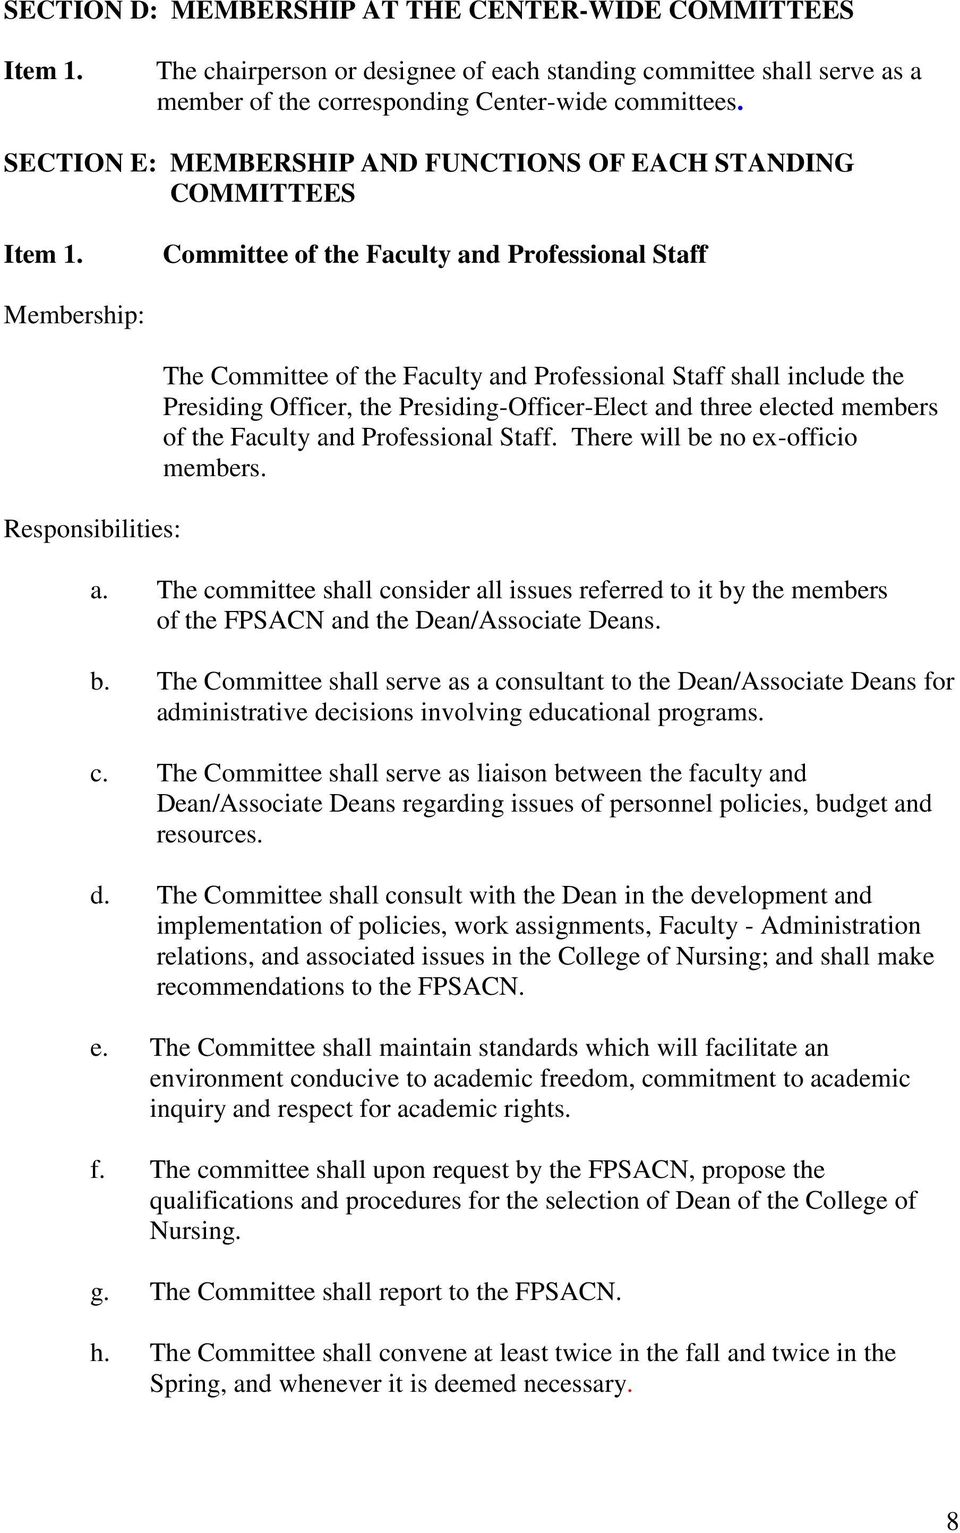 Officer, the Presiding-Officer-Elect and three elected members of the Faculty and Professional Staff. There will be no ex-officio members. a. The committee shall consider all issues referred to it by the members of the FPSACN and the Dean/Associate Deans.